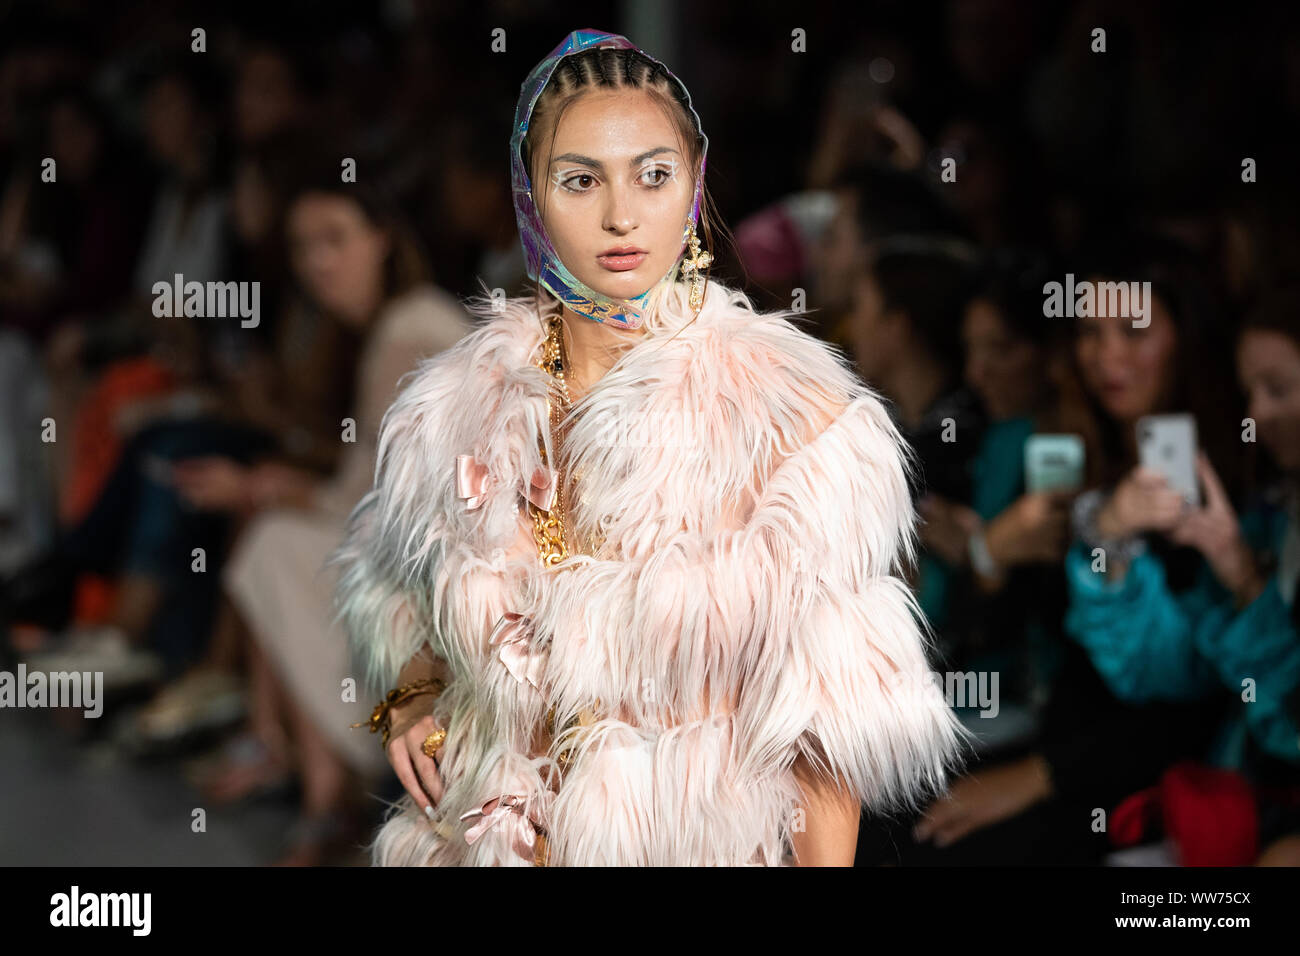 Models on the catwalk during the Emilia Walls Four Seasons Spring/Summer 2020 London Fashion Week show at BFC Show Space Show, The Strand in London. Stock Photo